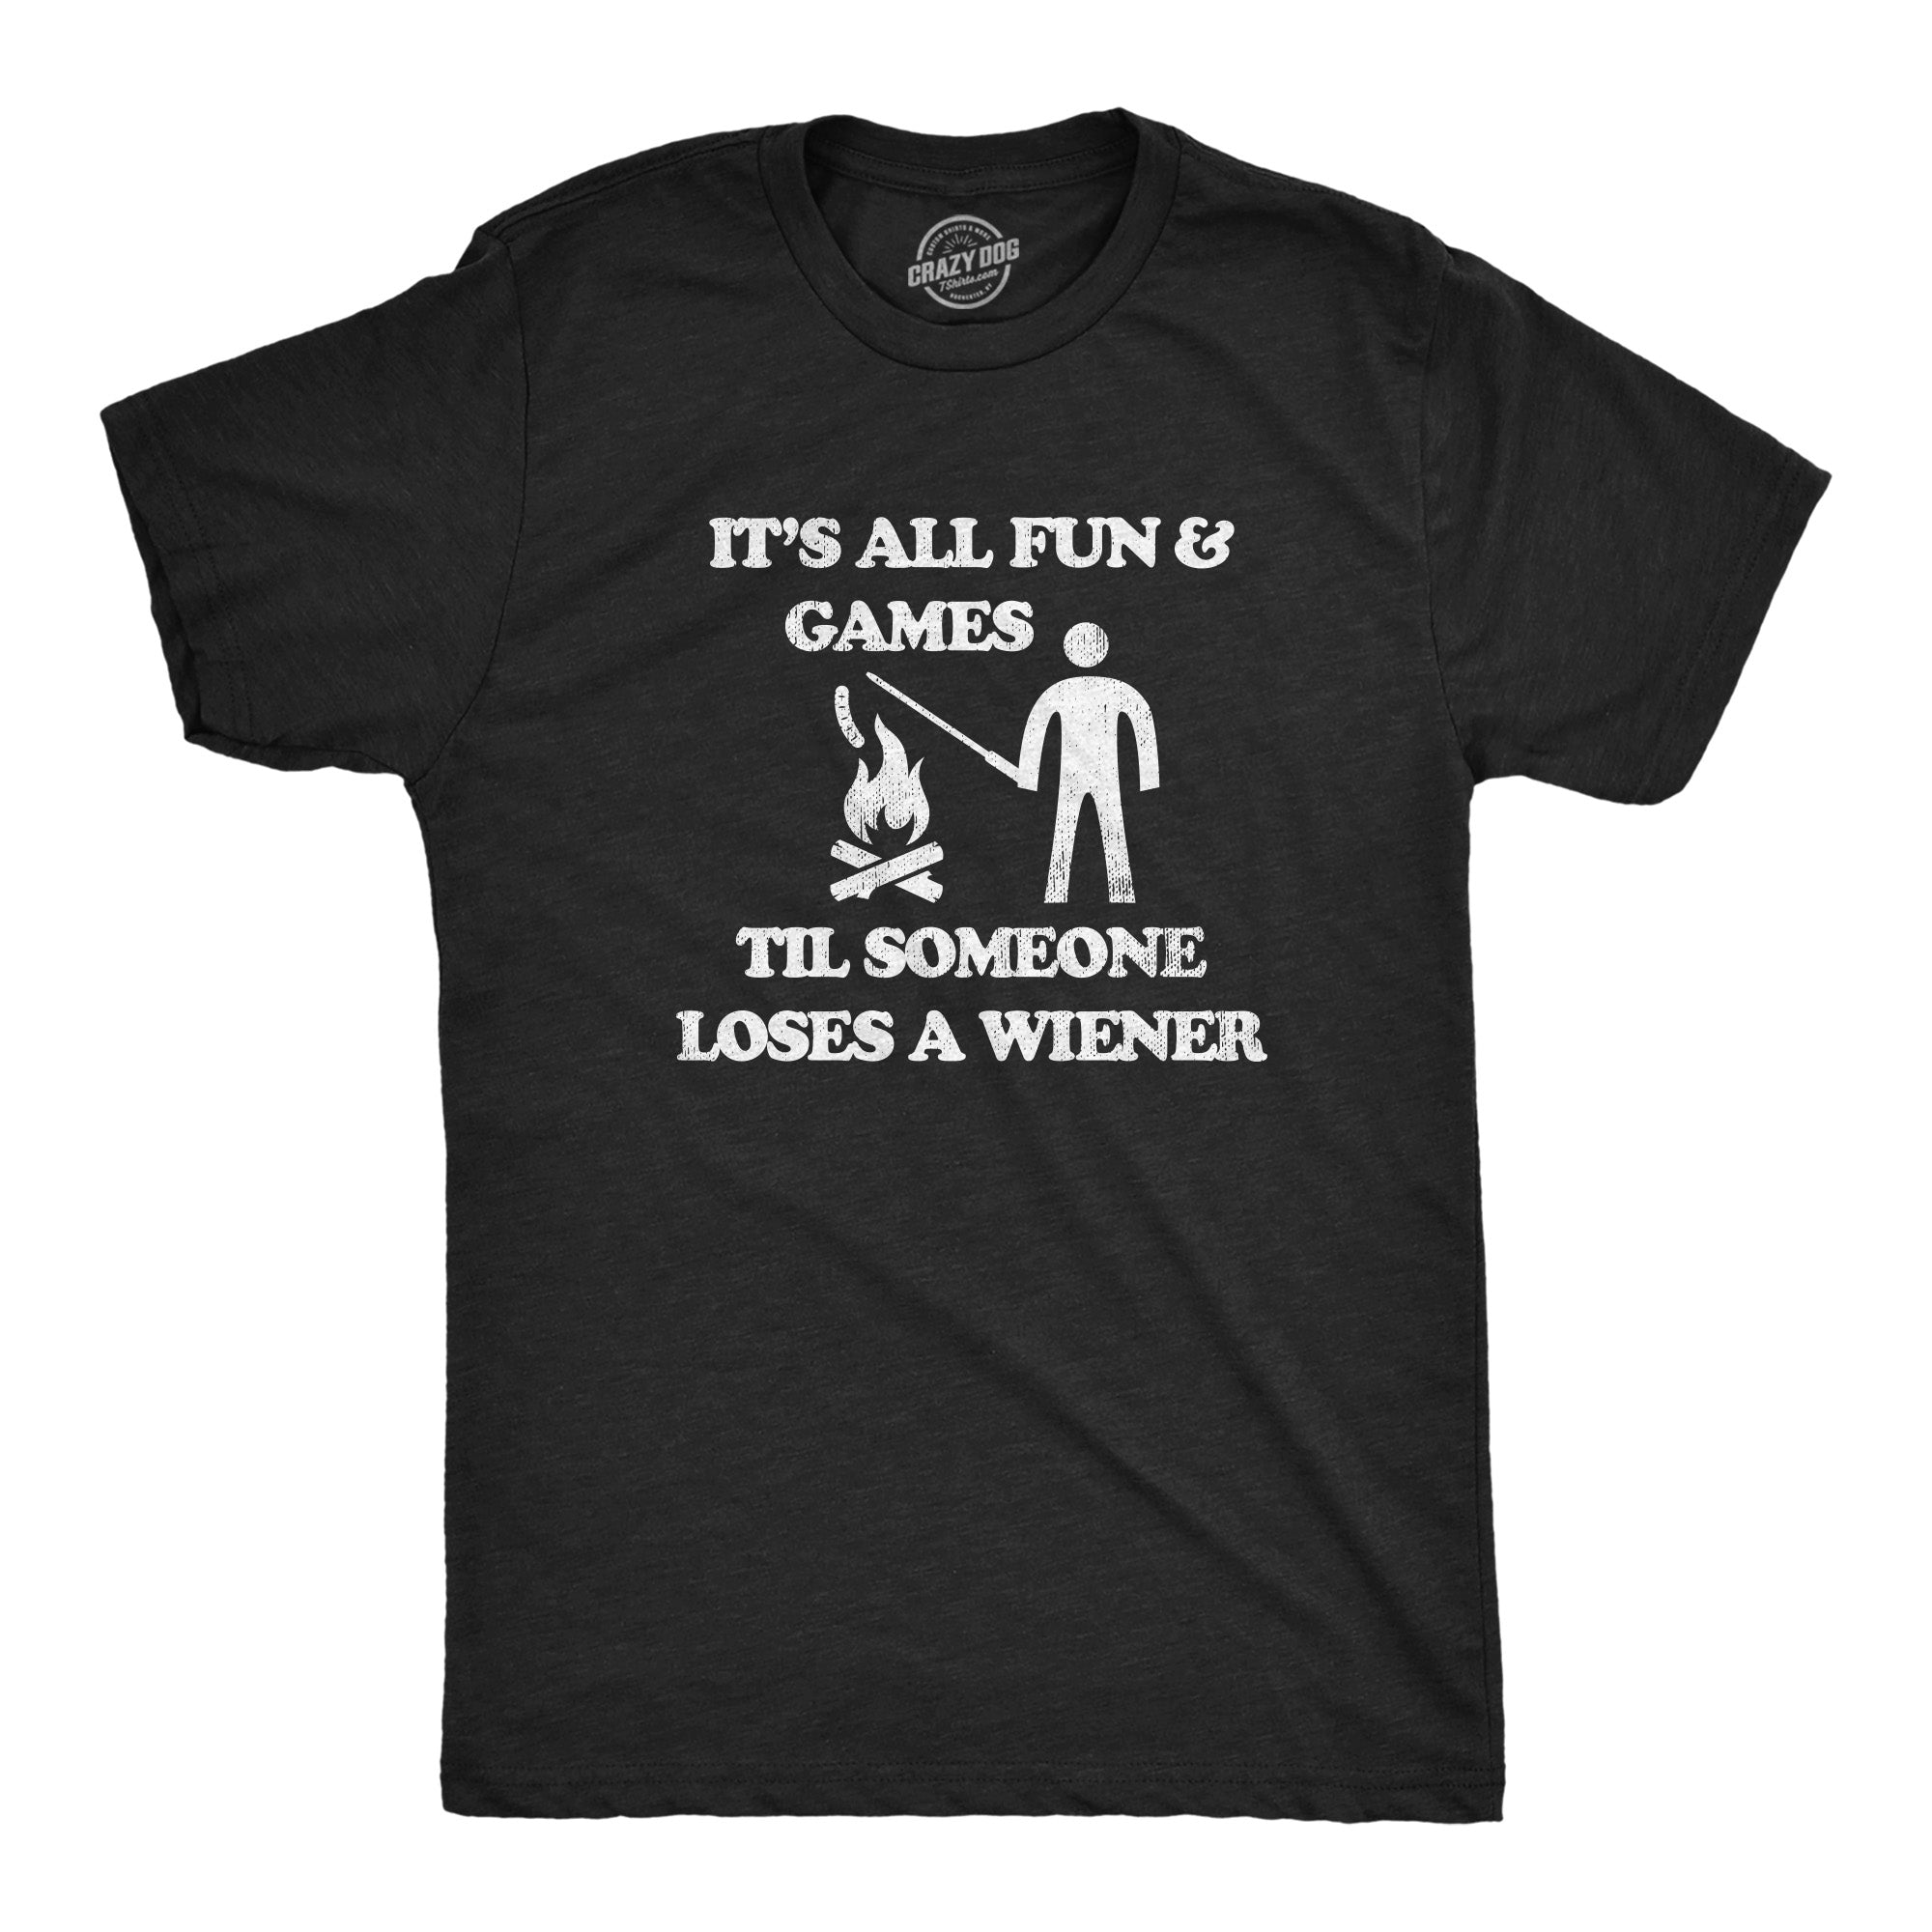 Funny Heather Black - WIENER Its All Fun And Games Til Someone Loses A Wiener Mens T Shirt Nerdy Food sarcastic Tee